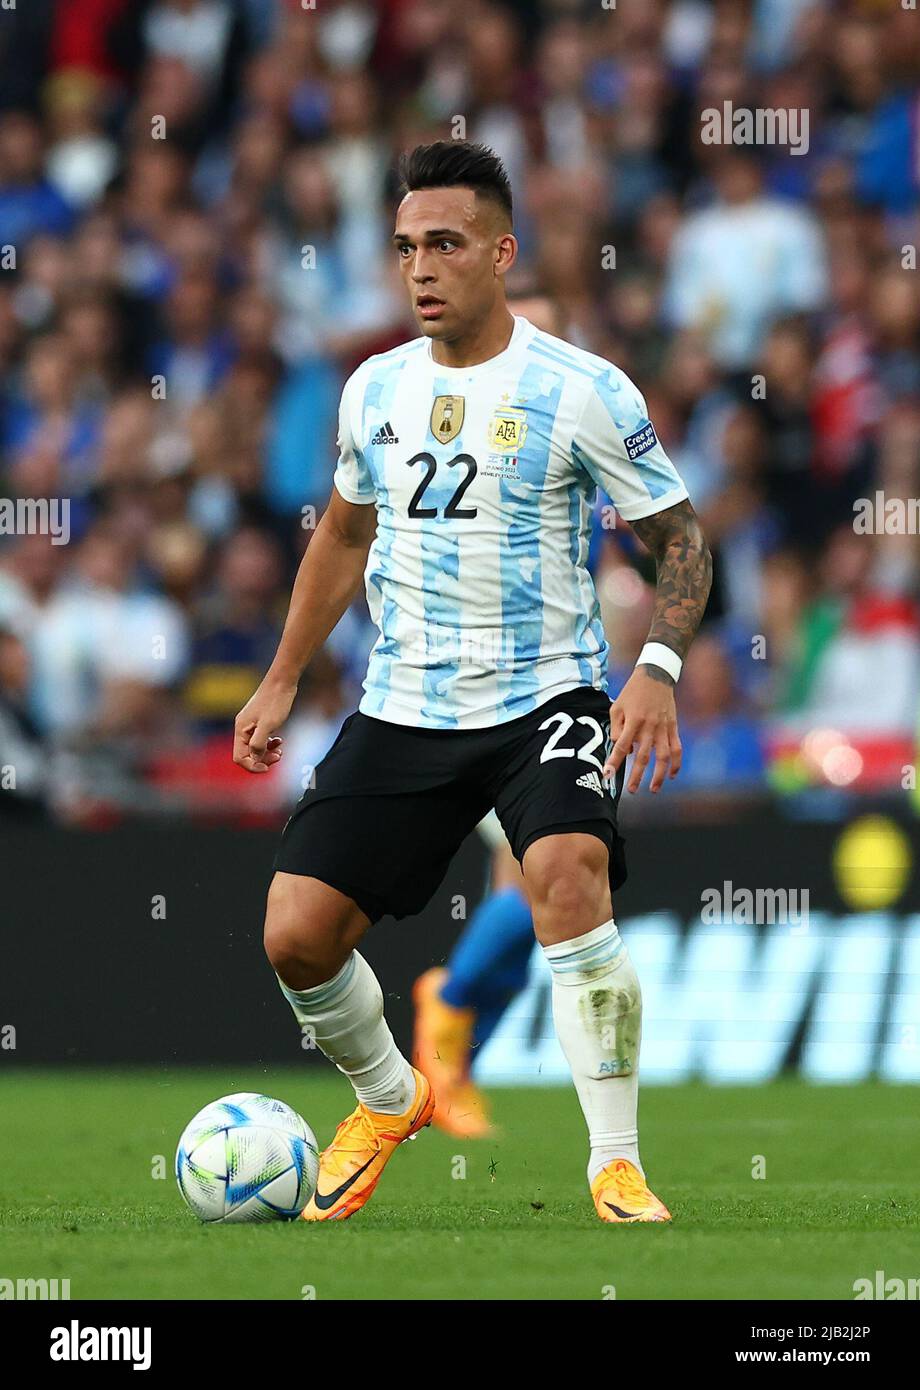 London, UK. 1st June, 2022. Cristian Pavon of Argentina during the CONMEBOL-UEFA Cup of Champions match at Wembley Stadium, London. Picture credit should read: David Klein/Sportimage Credit: Sportimage/Alamy Live News Credit: Sportimage/Alamy Live News Stock Photo